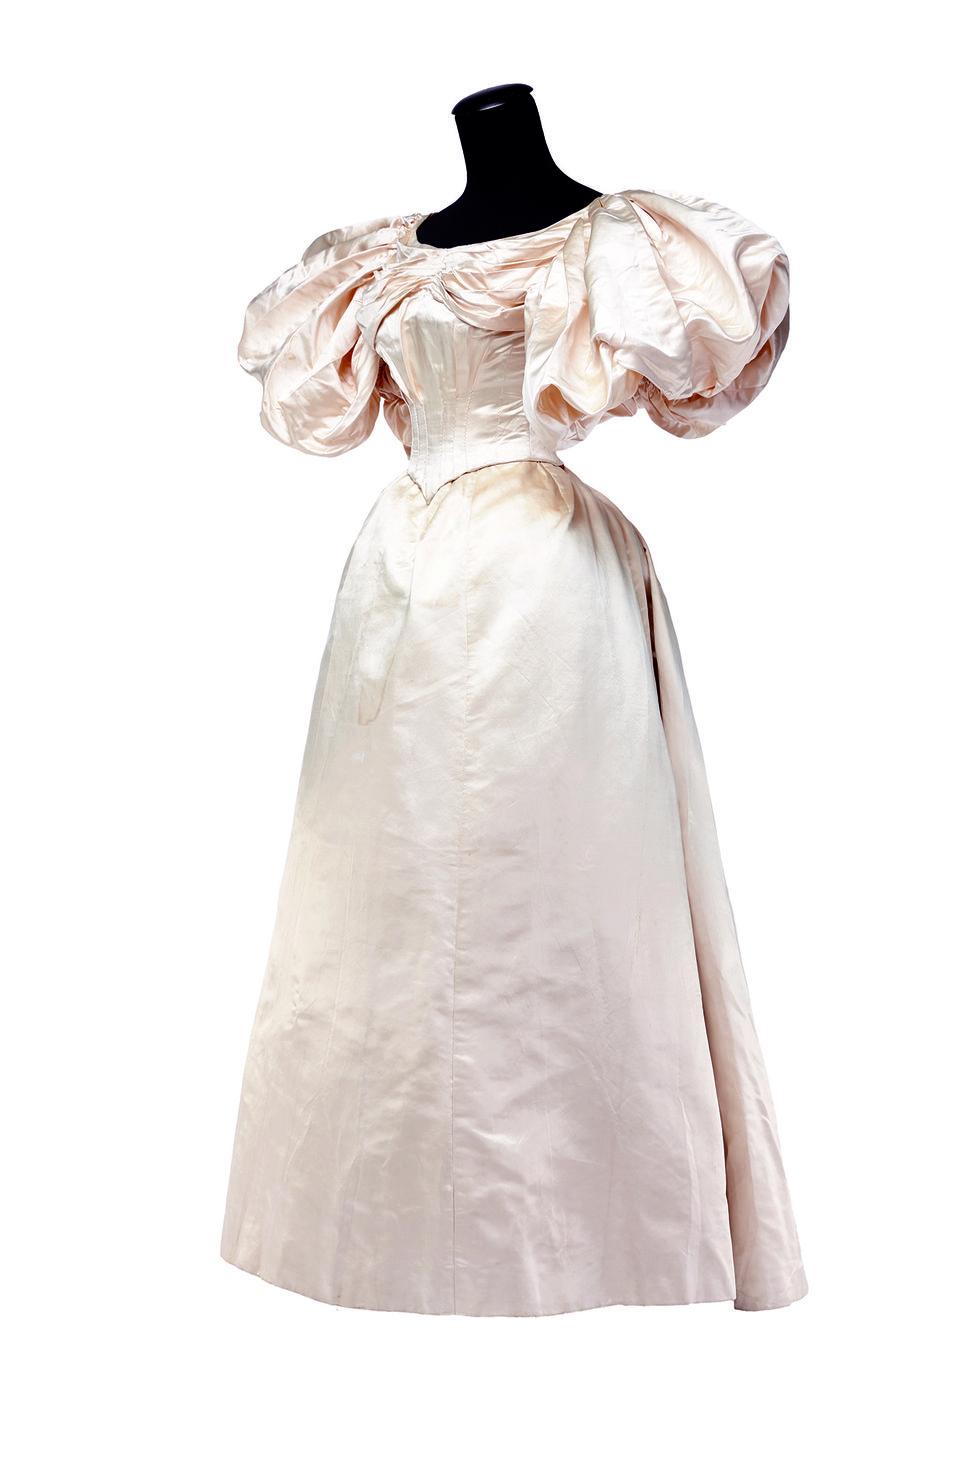 Clothing, Dress, White, Victorian fashion, Gown, Day dress, Sleeve, Formal wear, A-line, Outerwear, 